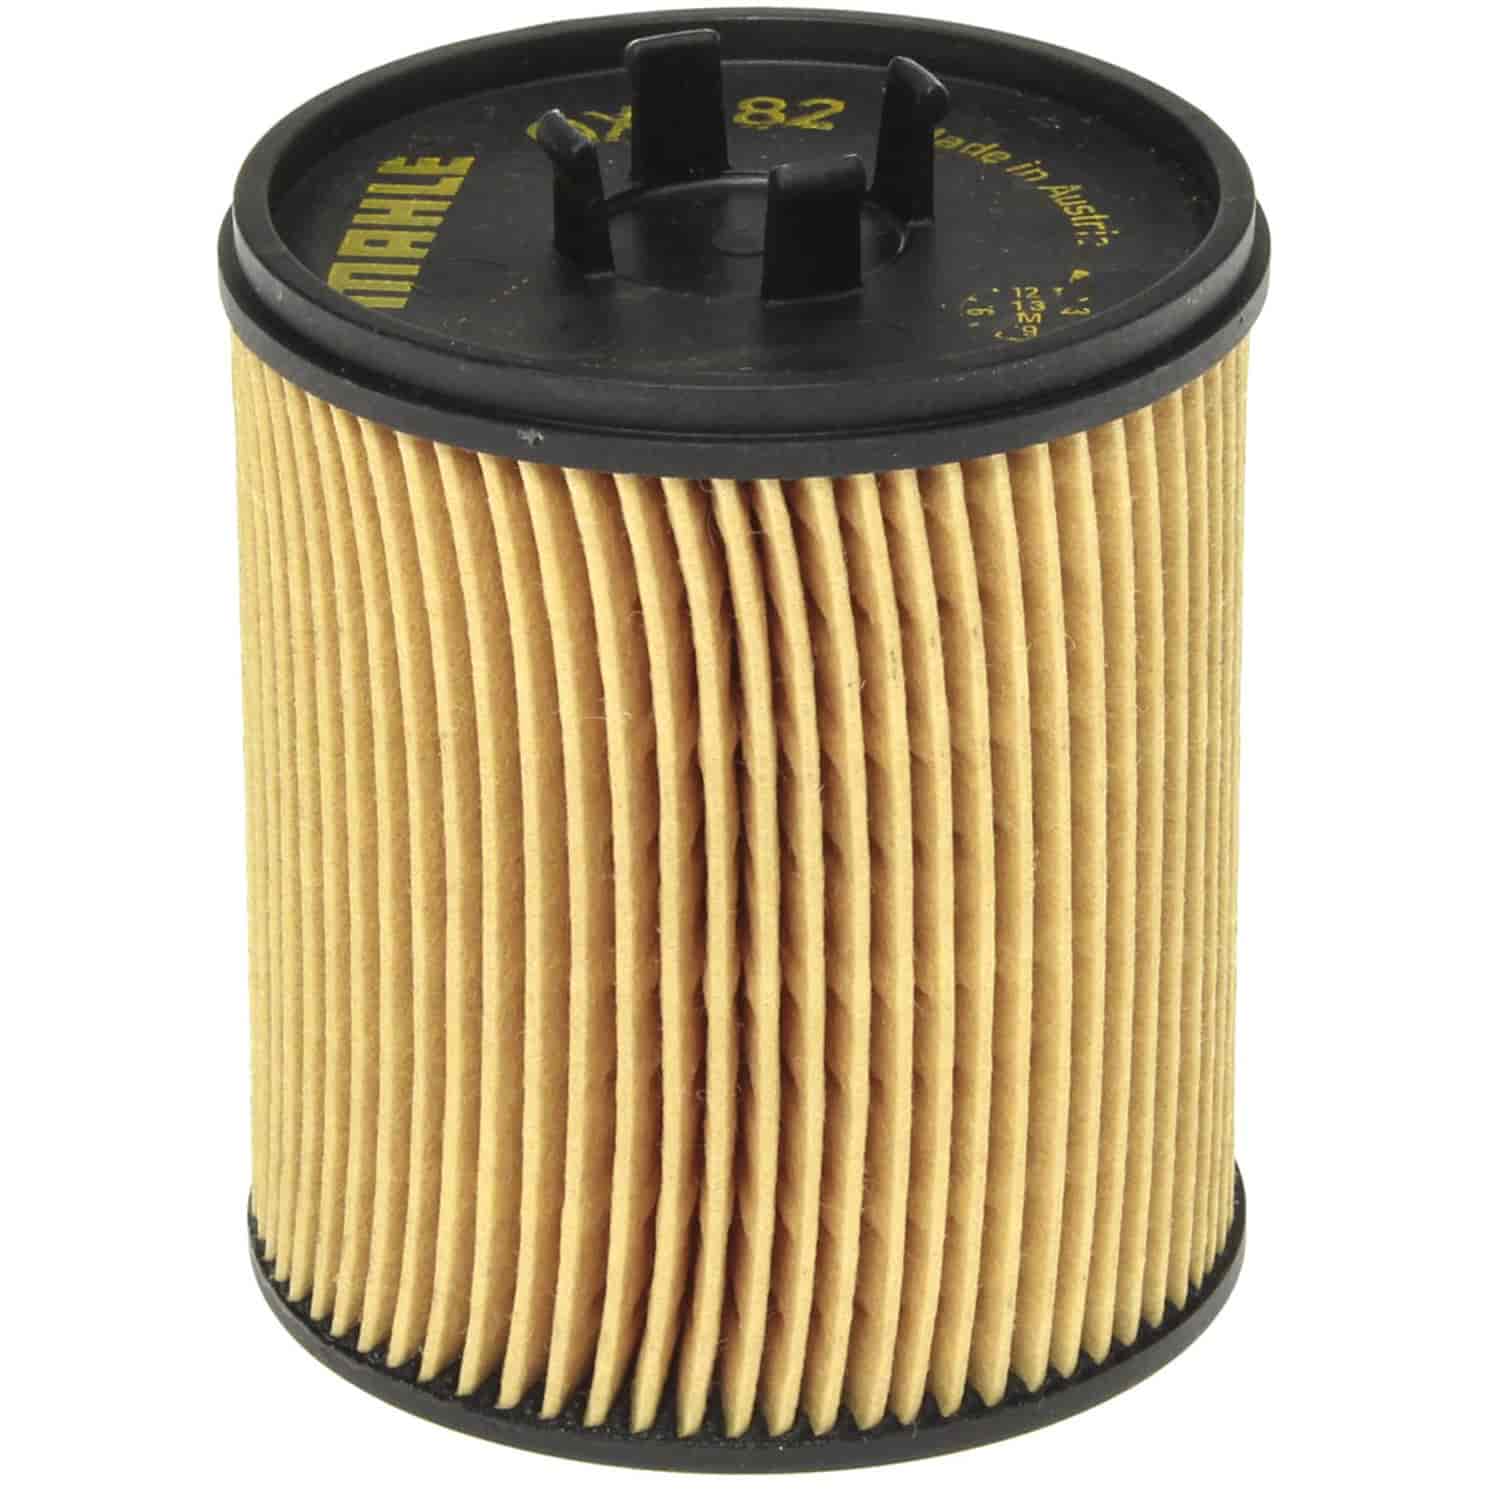 Mahle Oil Filter Cadillac Catera 2000-2001 CTS 3.2L 2003-2004 Saturn 3.0L 2000-2005